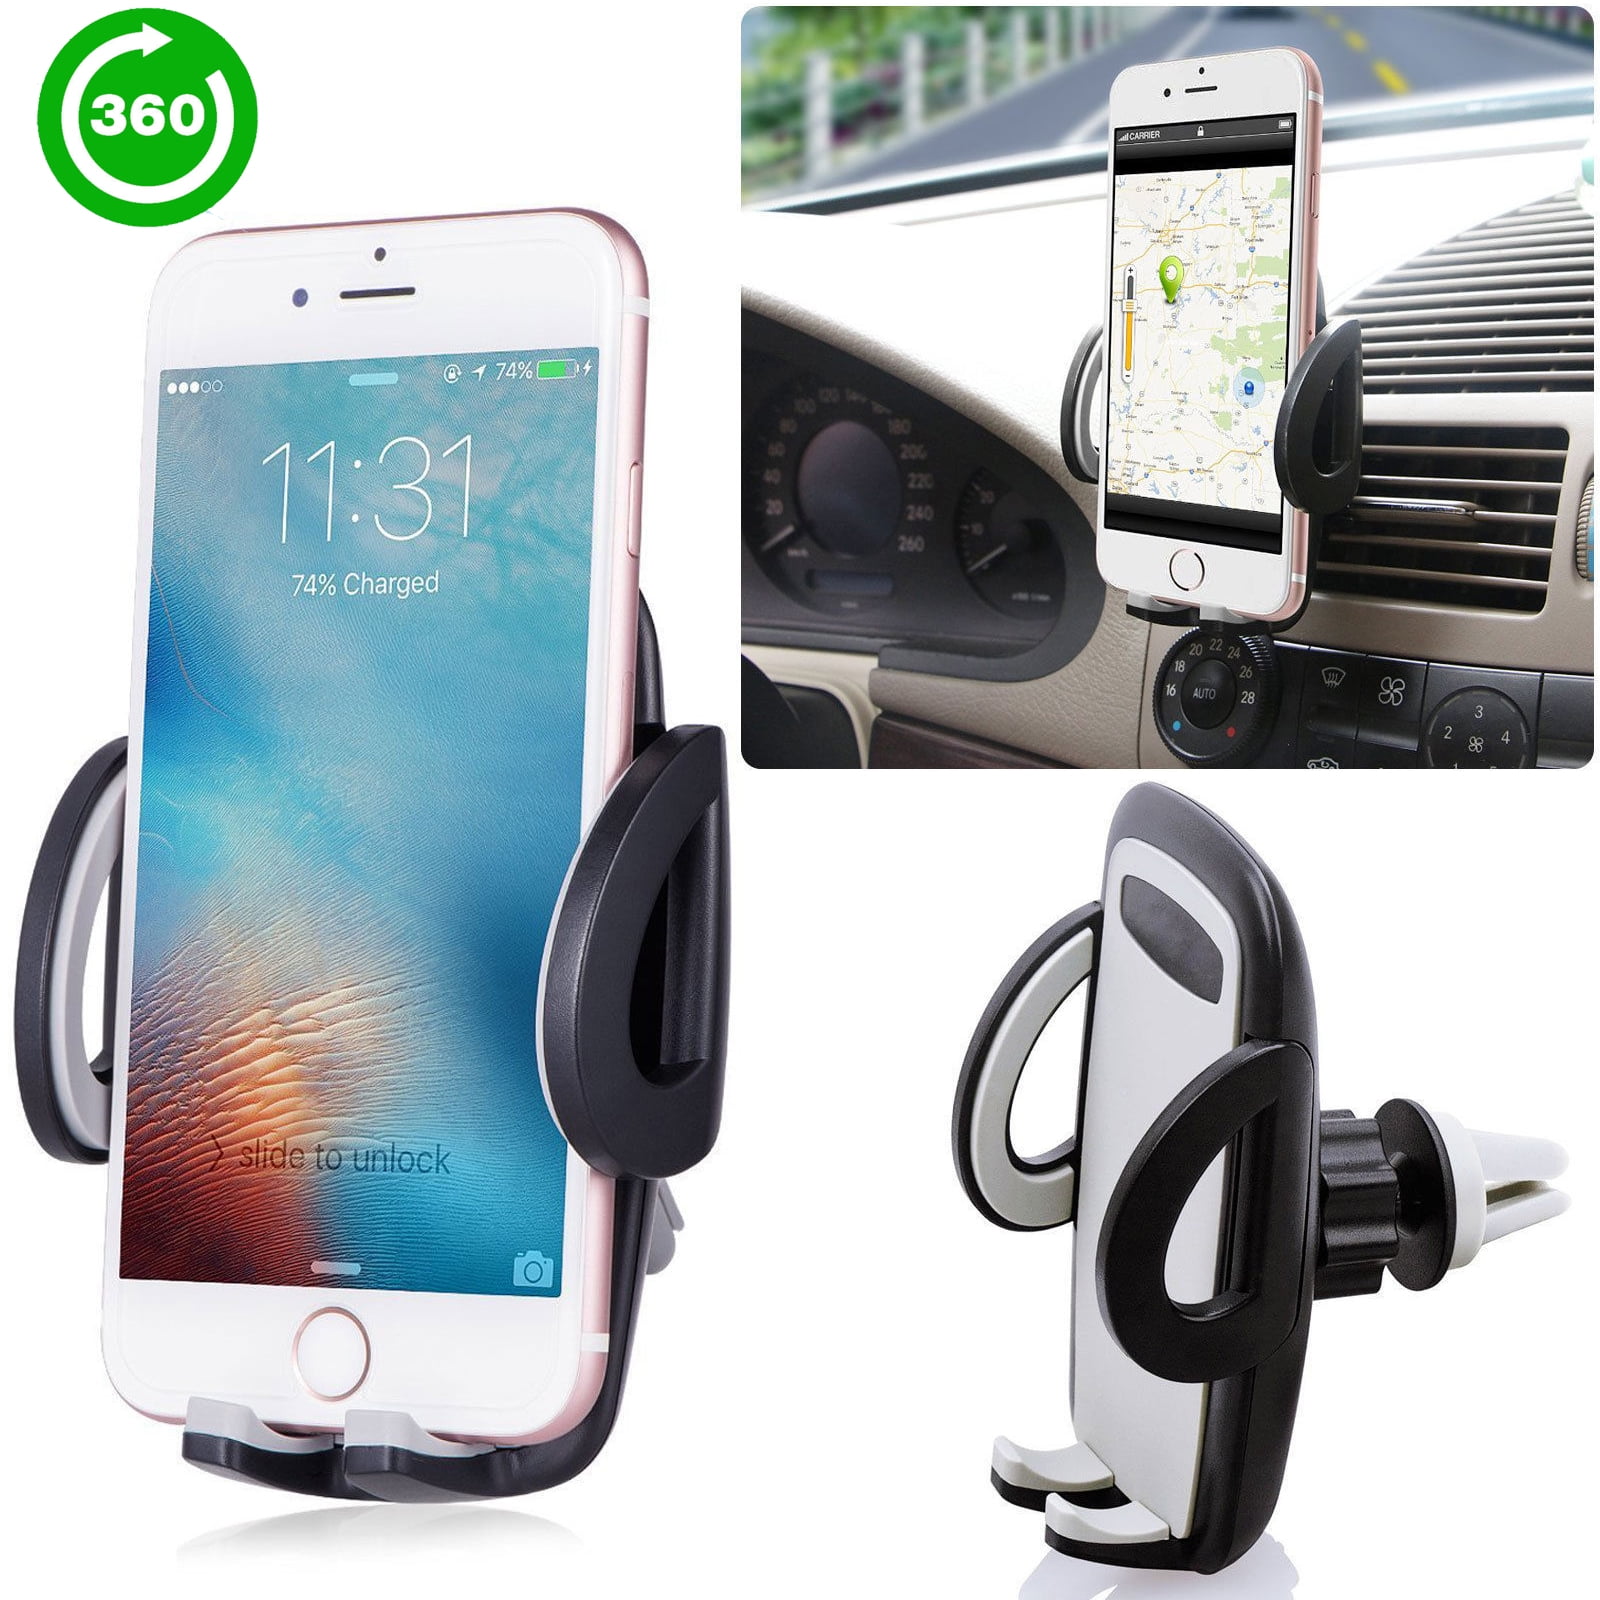 2019 Car Phone Mount,Universal Auto-Grip Air Vent Phone Cradle for Car Cell Phone Car Holder for iPhone X/Max Samsung S9/S9 Edge